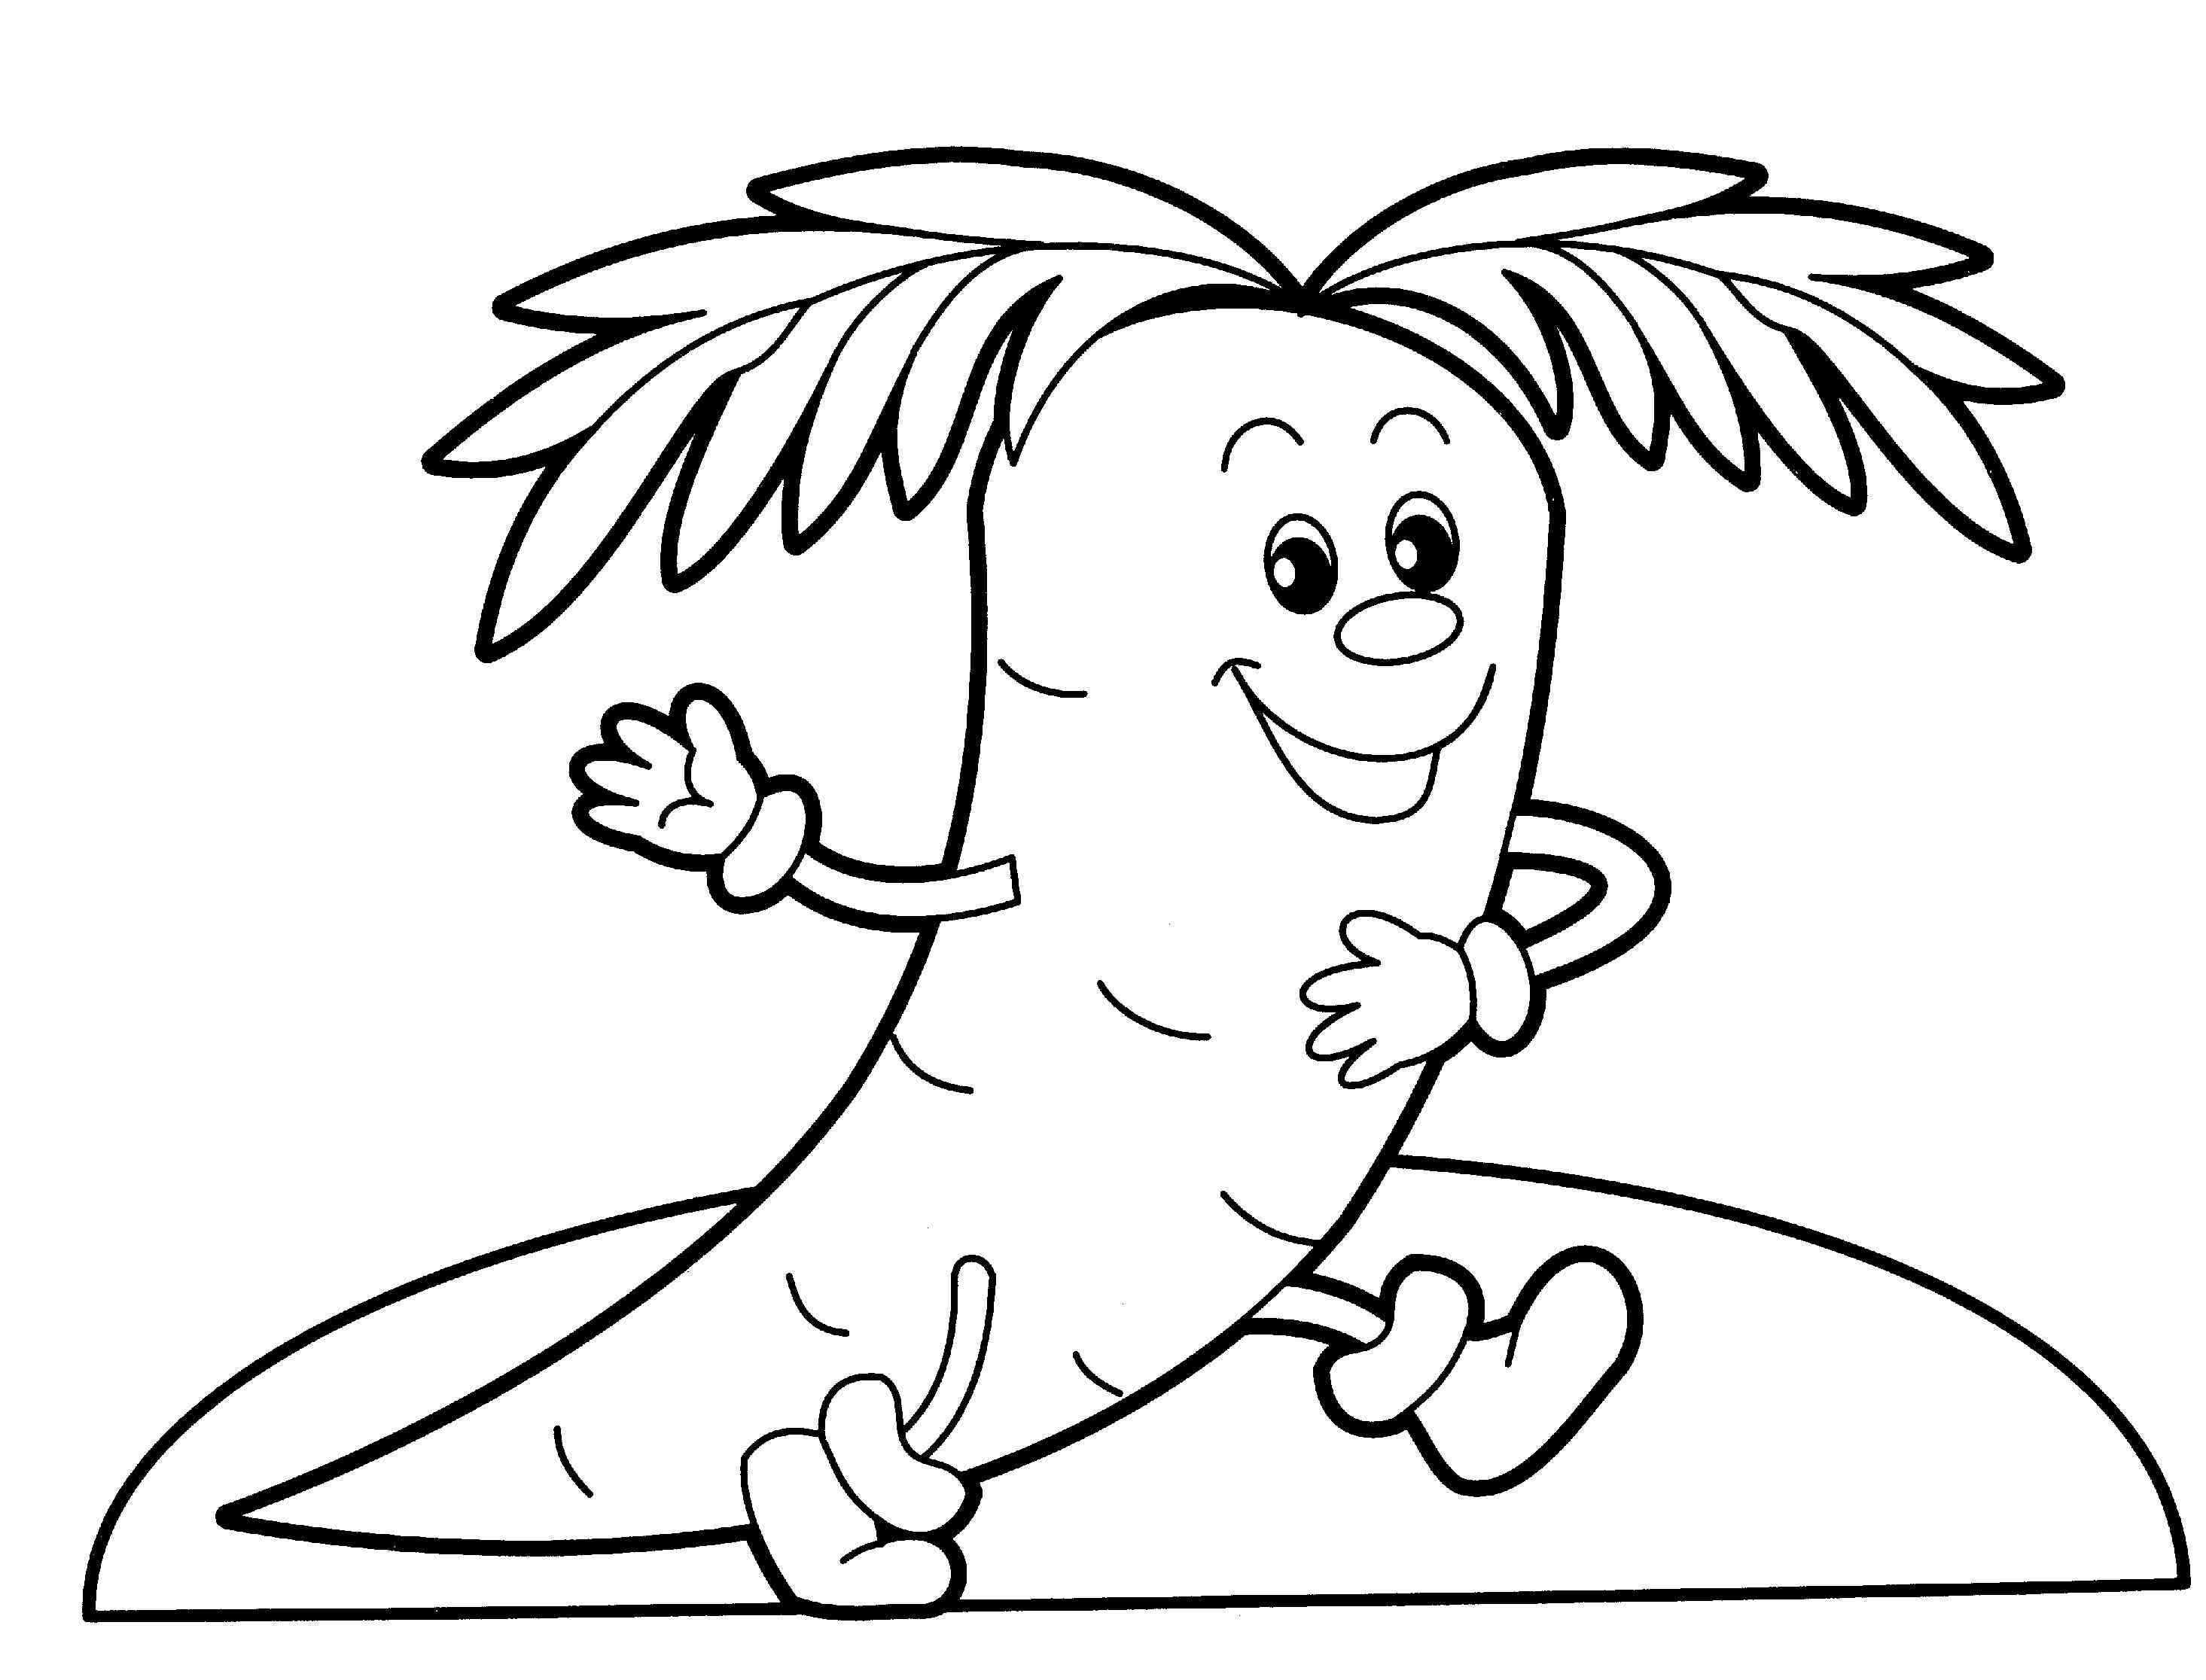 Nature and plants coloring pages for babies 4 / Nature and plants ...